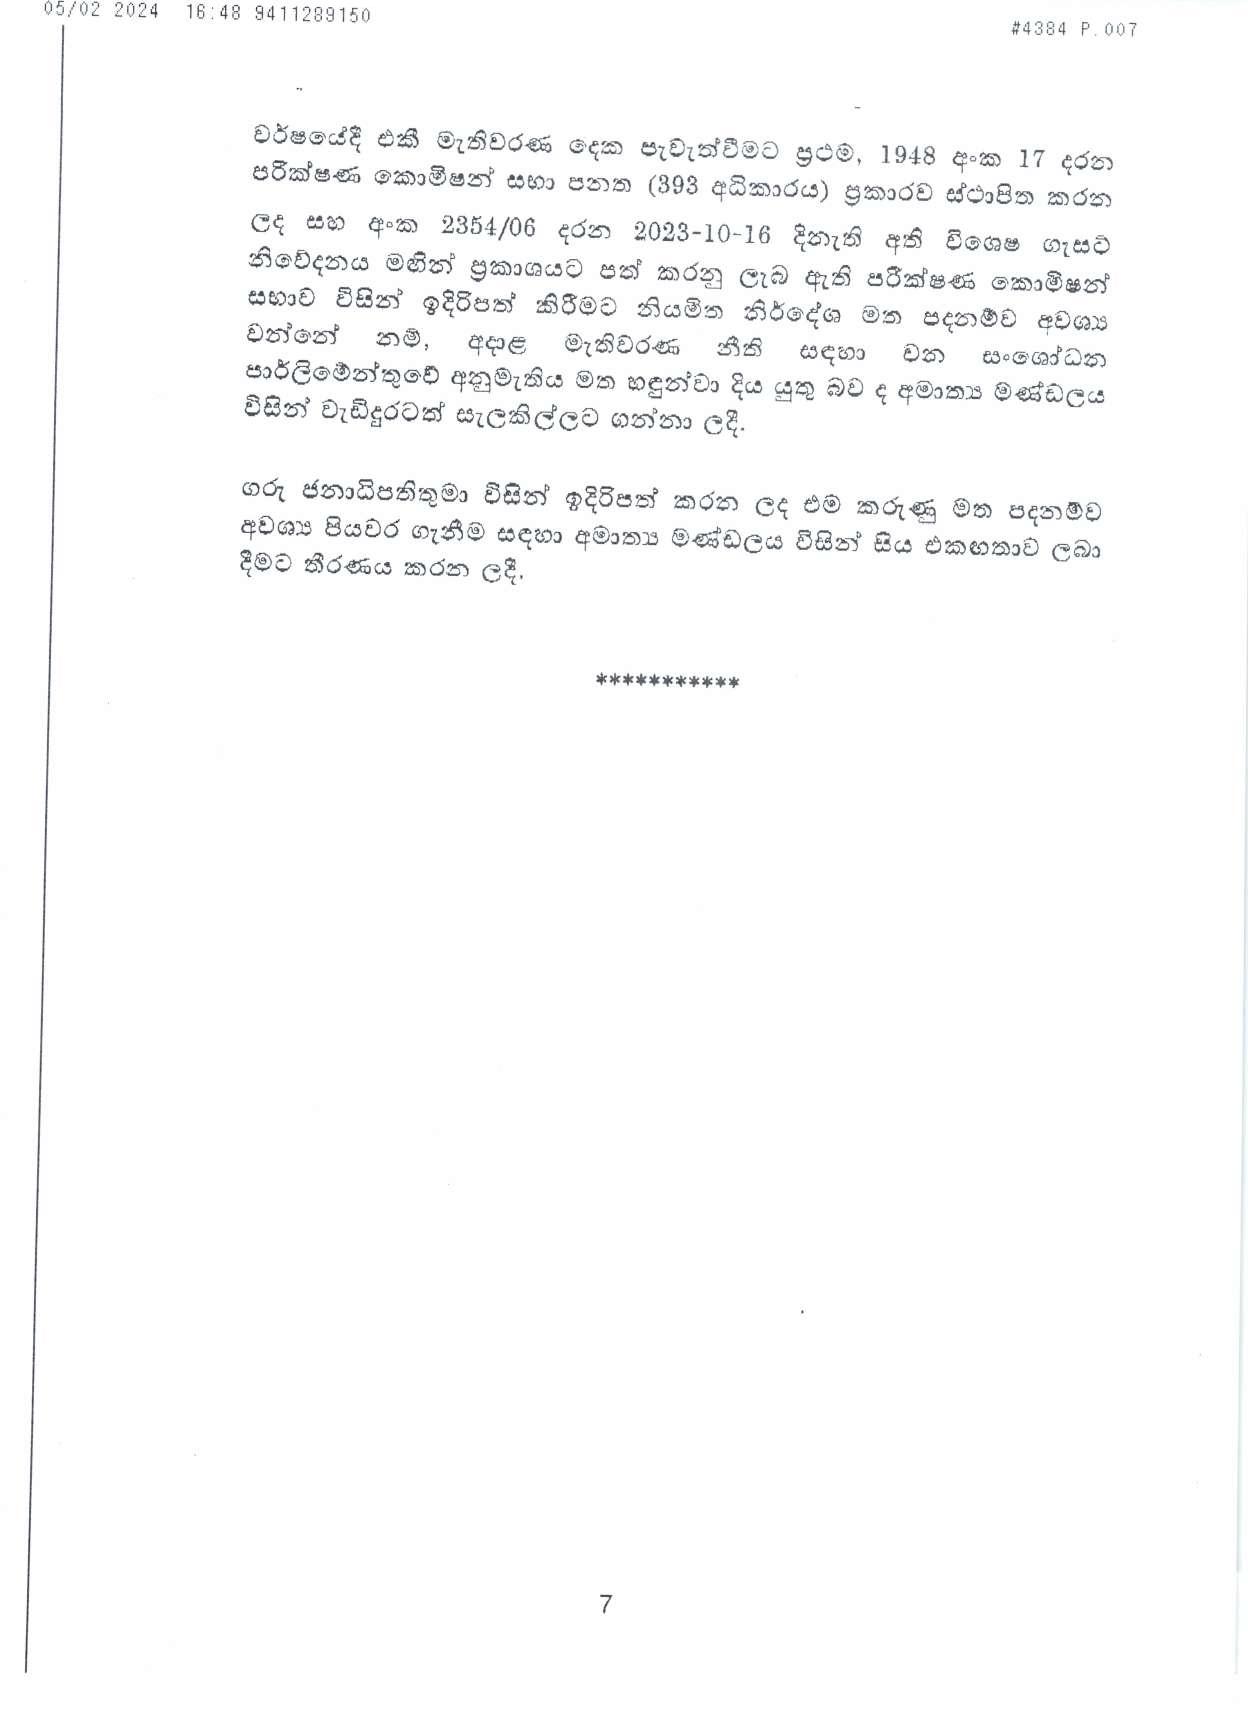 Cabinet Decision on 05.02.2024 page 007